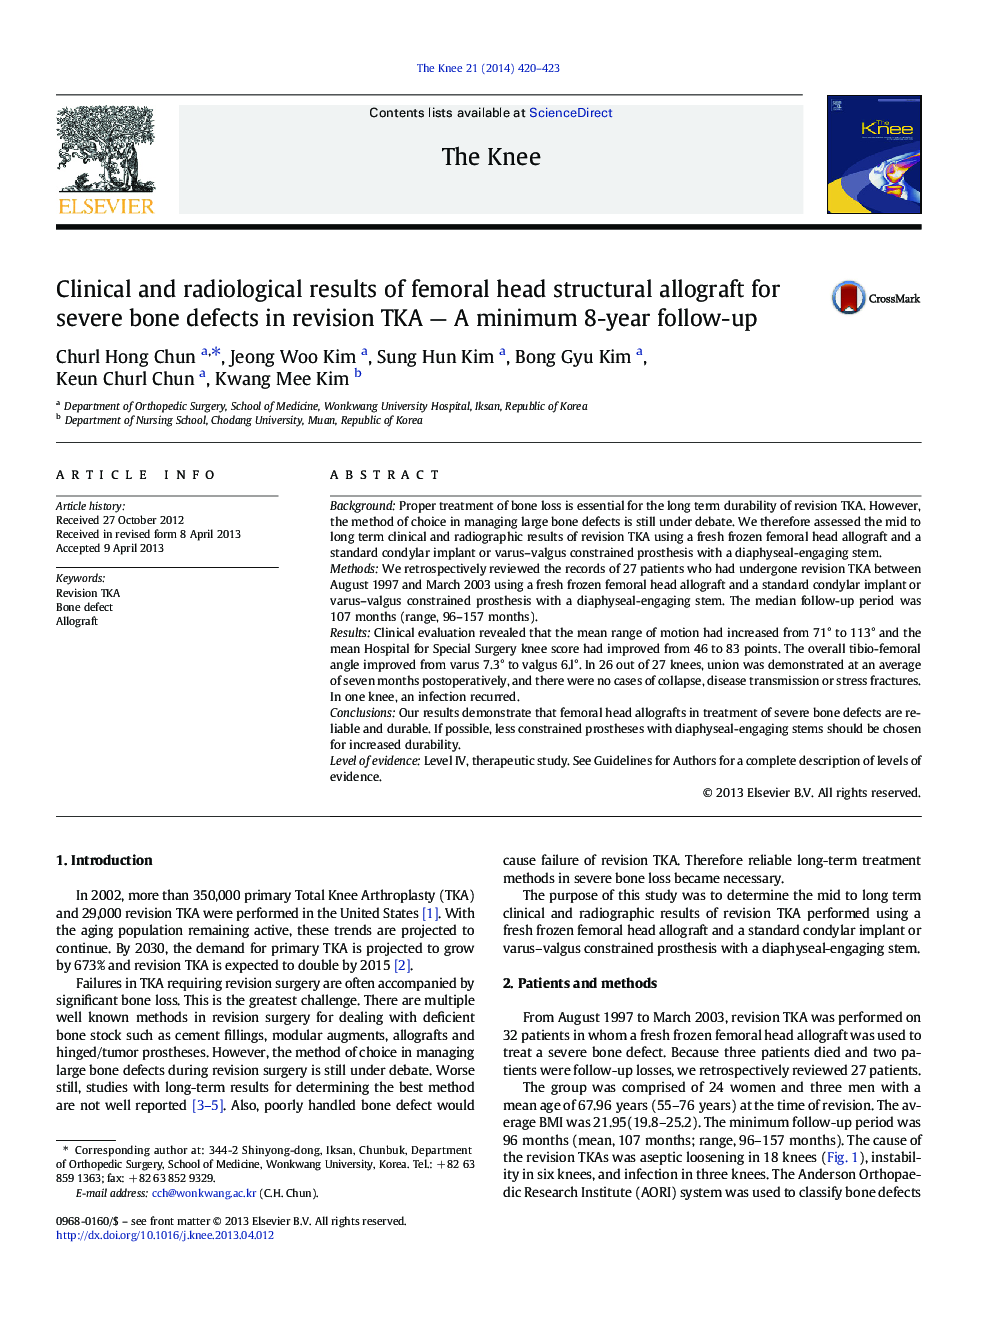 Clinical and radiological results of femoral head structural allograft for severe bone defects in revision TKA — A minimum 8-year follow-up